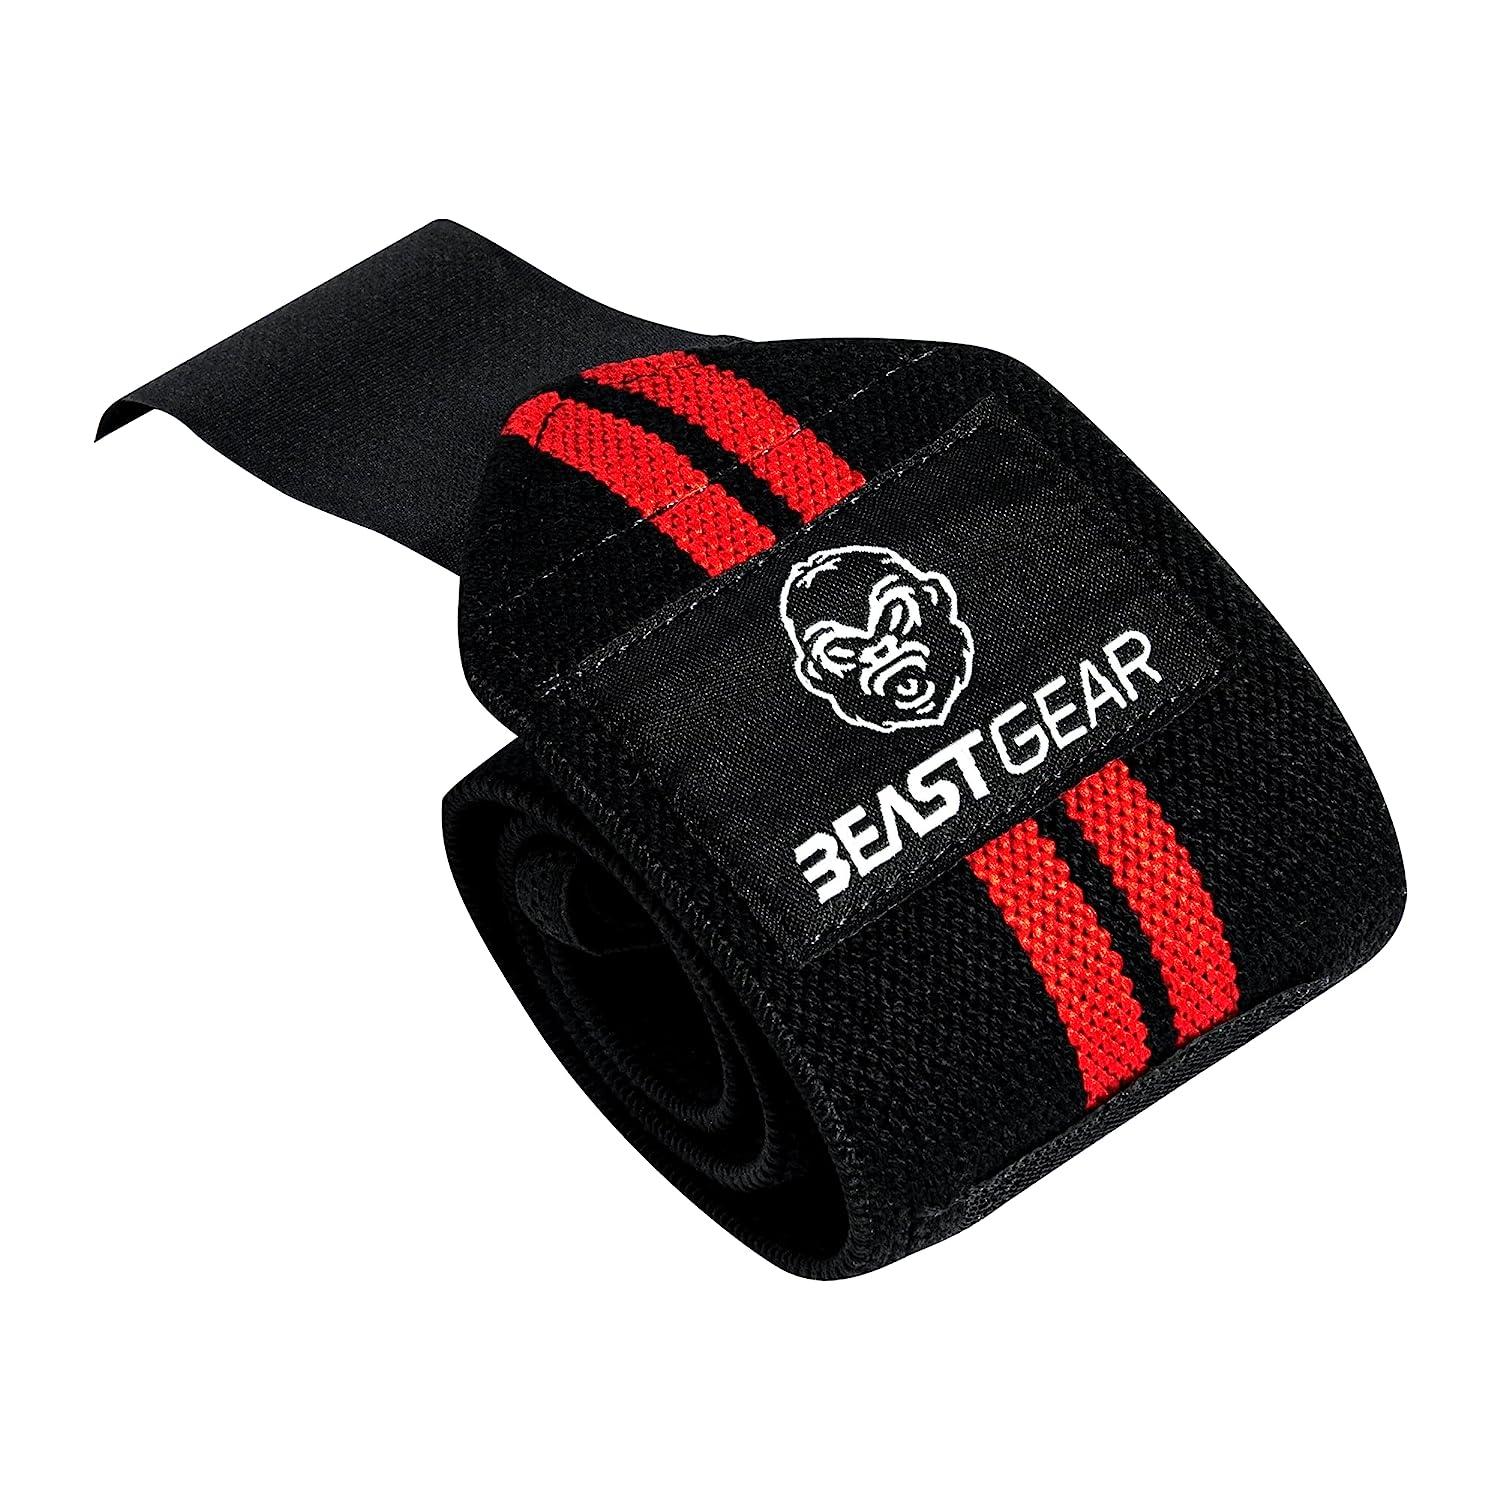 Beast Gear Wrist Wraps for Weightlifting - 20 Wrist Support Straps for  Weight Lifting with Thumb Loop